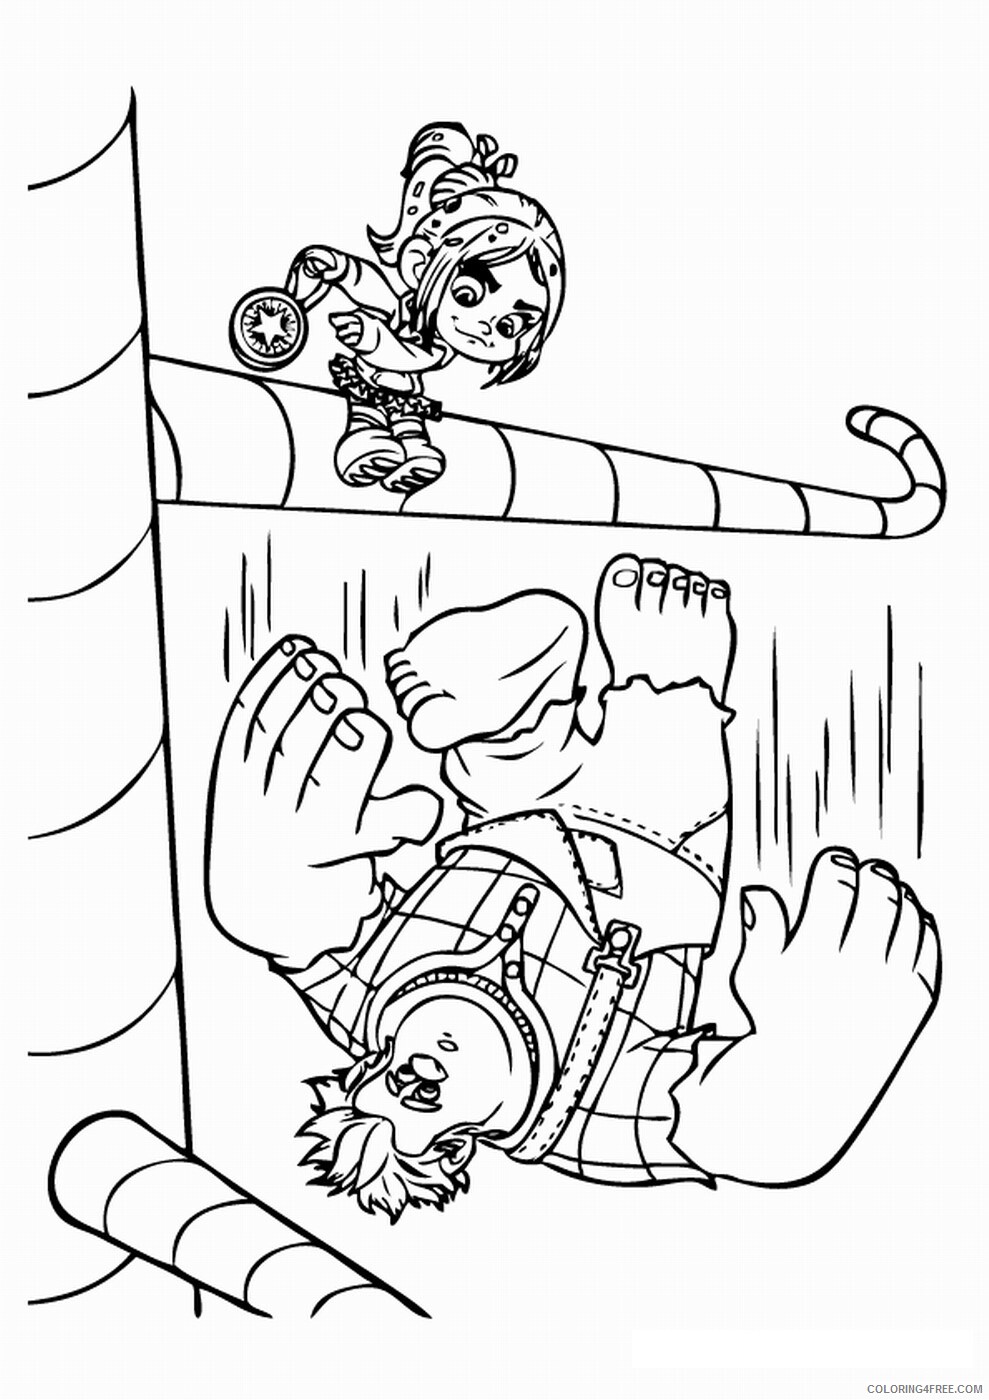 Wreck It Ralph Coloring Pages TV Film ralph_cl_27 Printable 2020 11810 Coloring4free